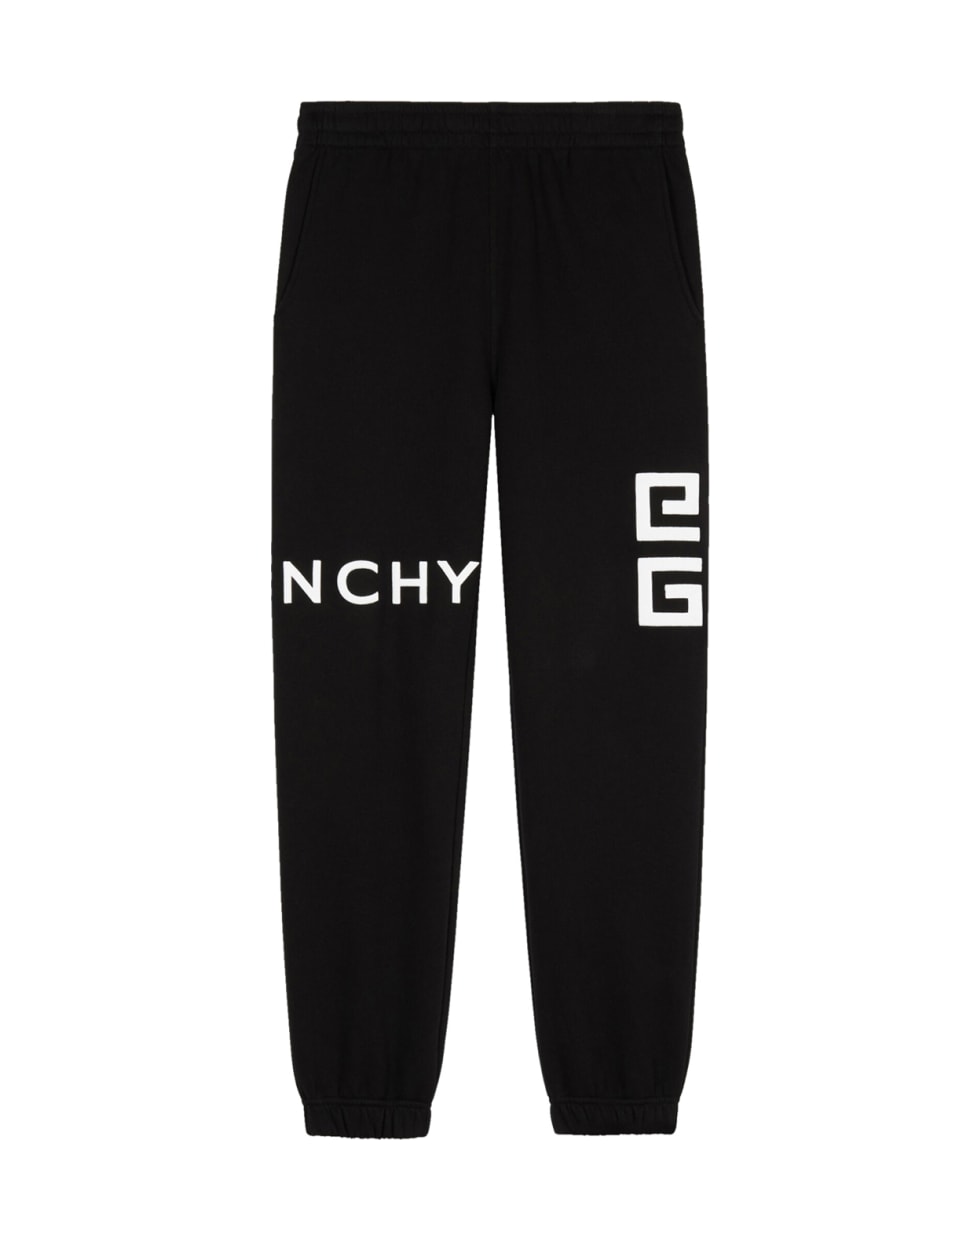 Givenchy Slim Fit Embroidered Trousers - Black